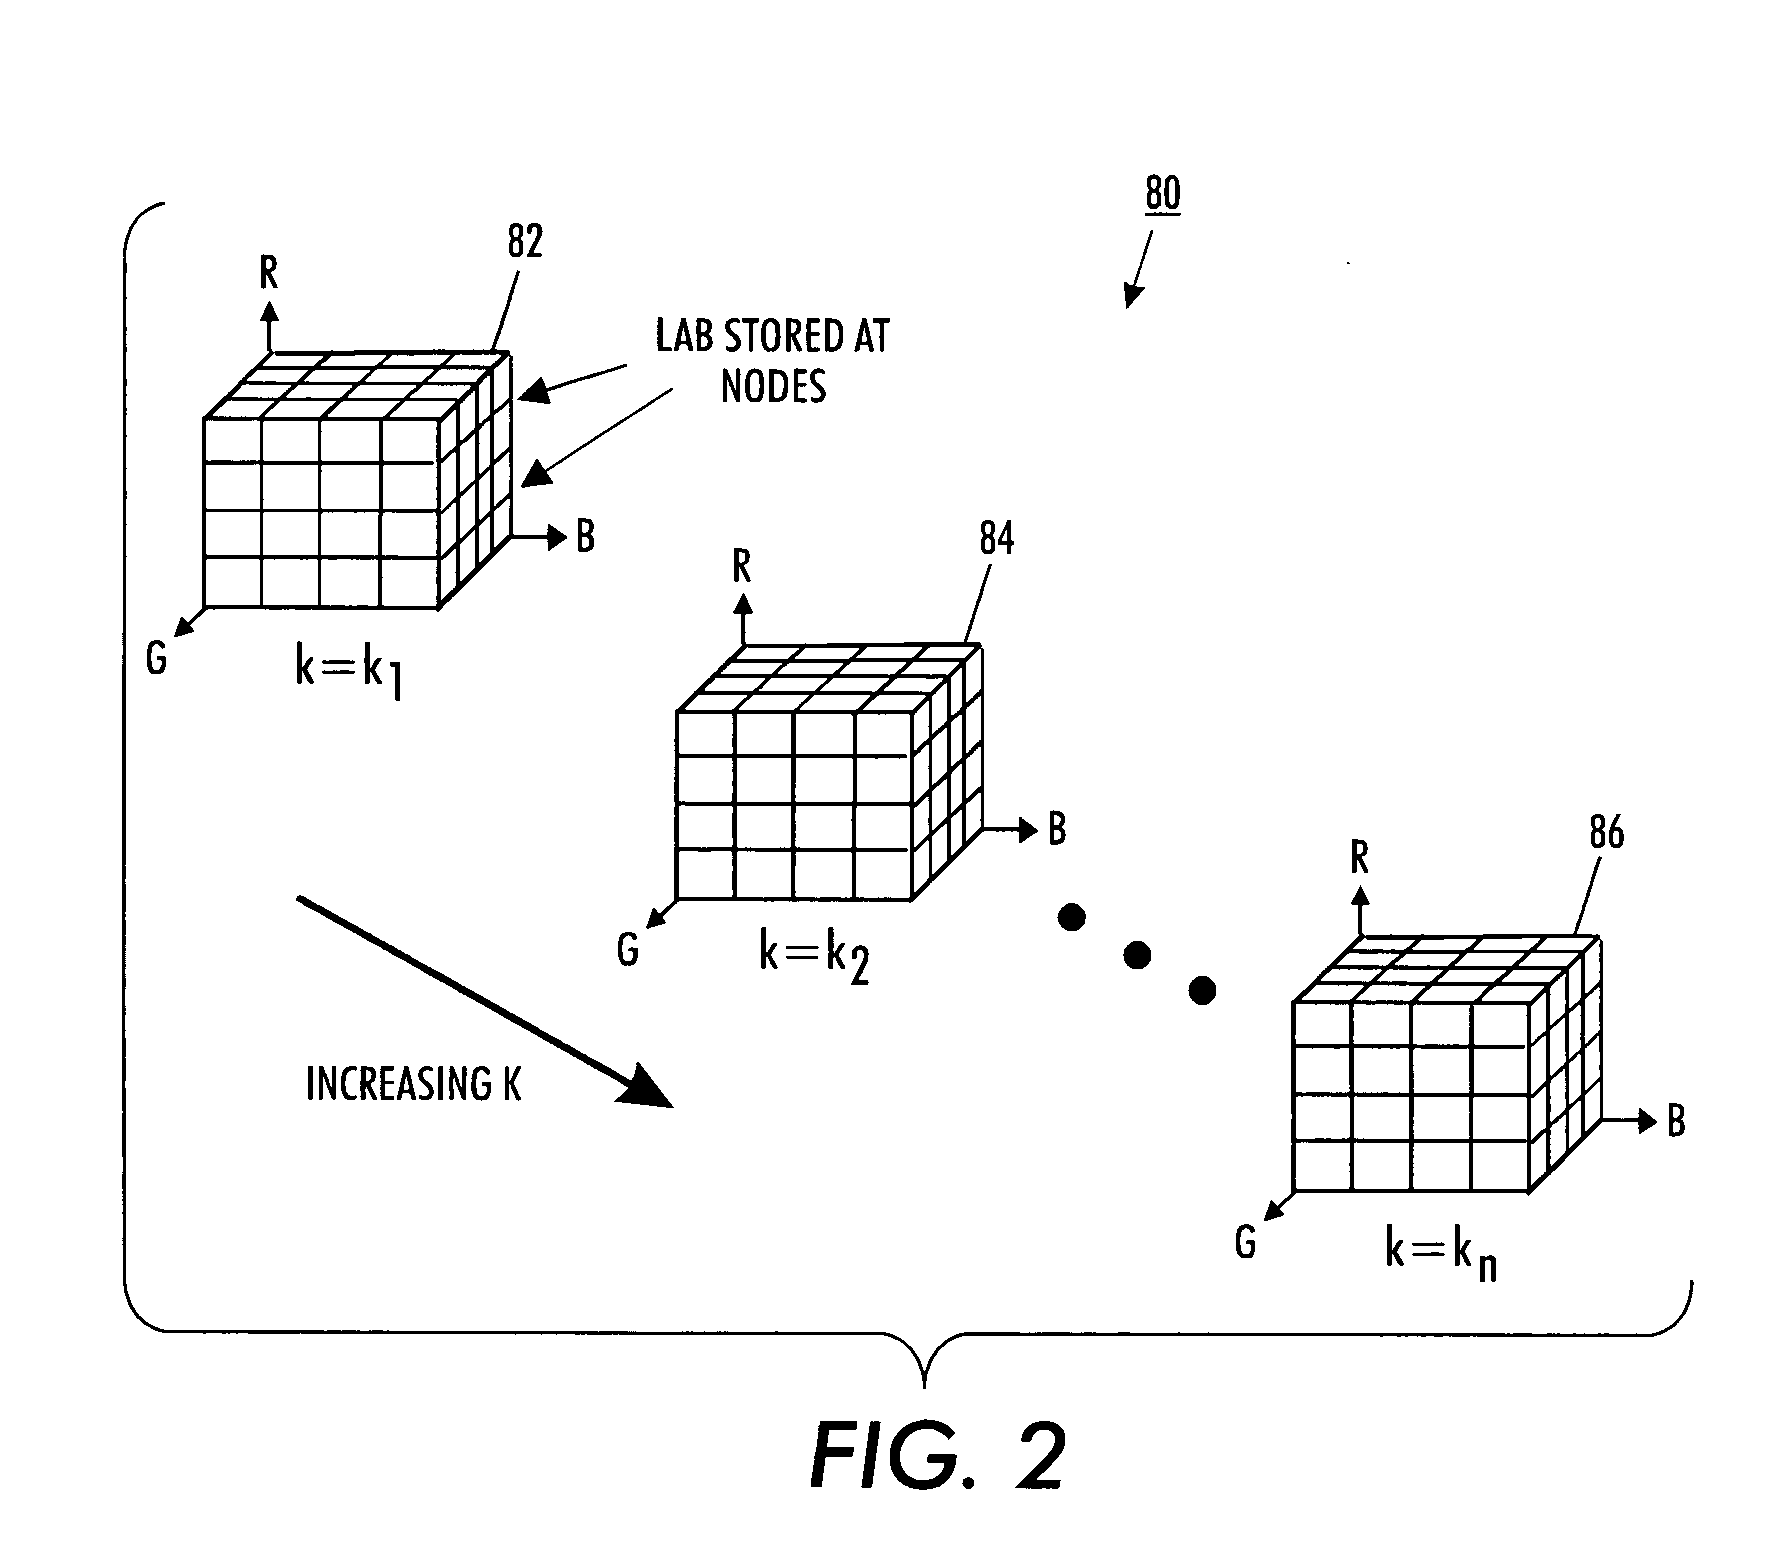 Method for scanner characterization for color measurement of printed media having four or more colorants